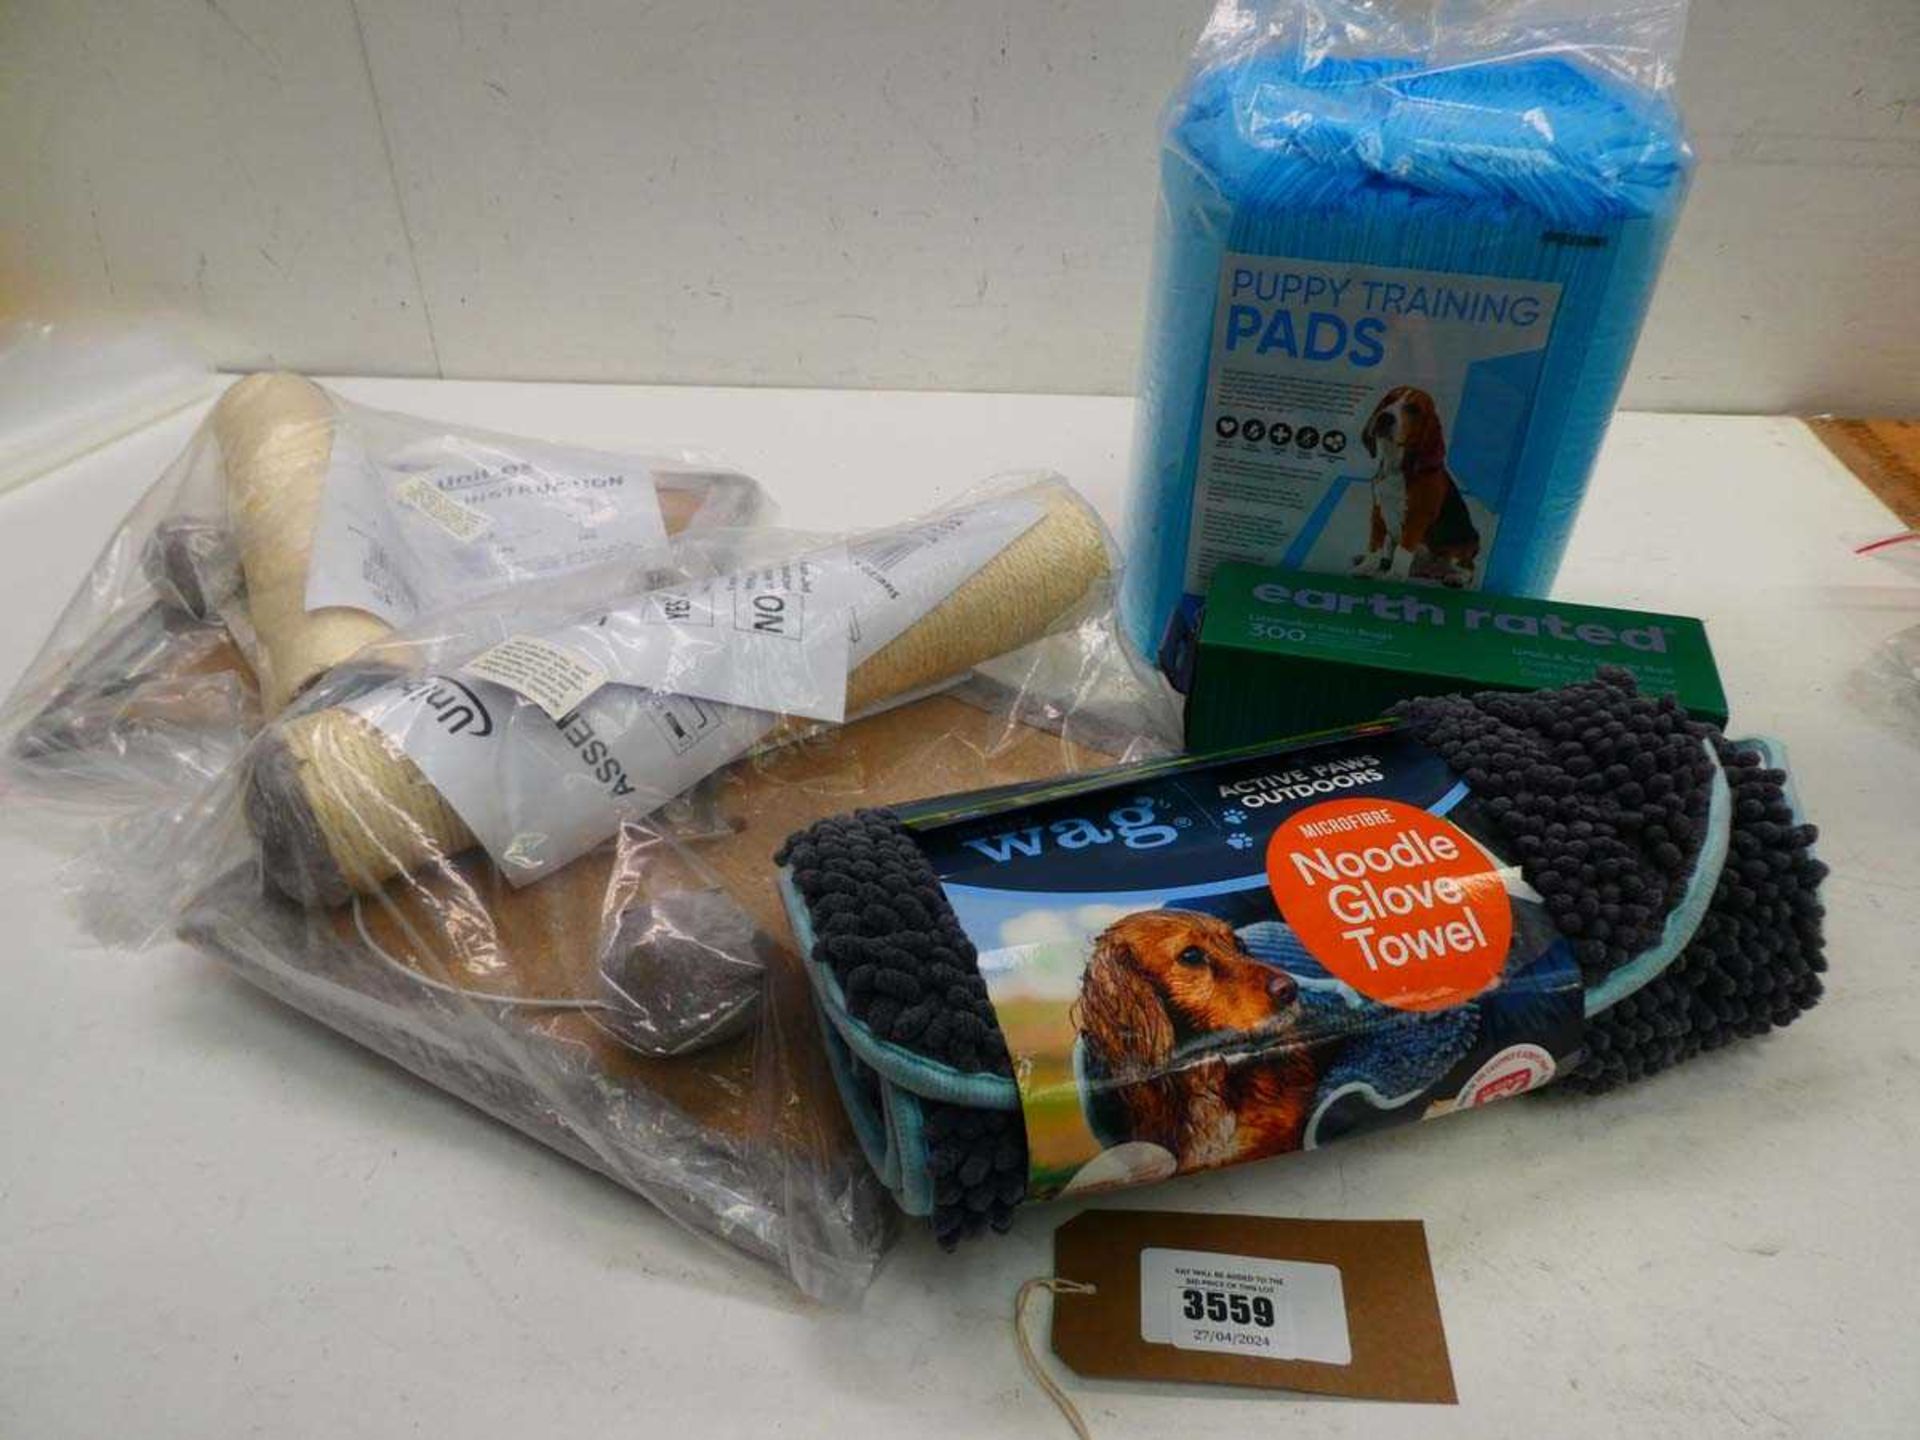 +VAT Puppy pads, cat scratching posts, noodle glove towel and poo bags